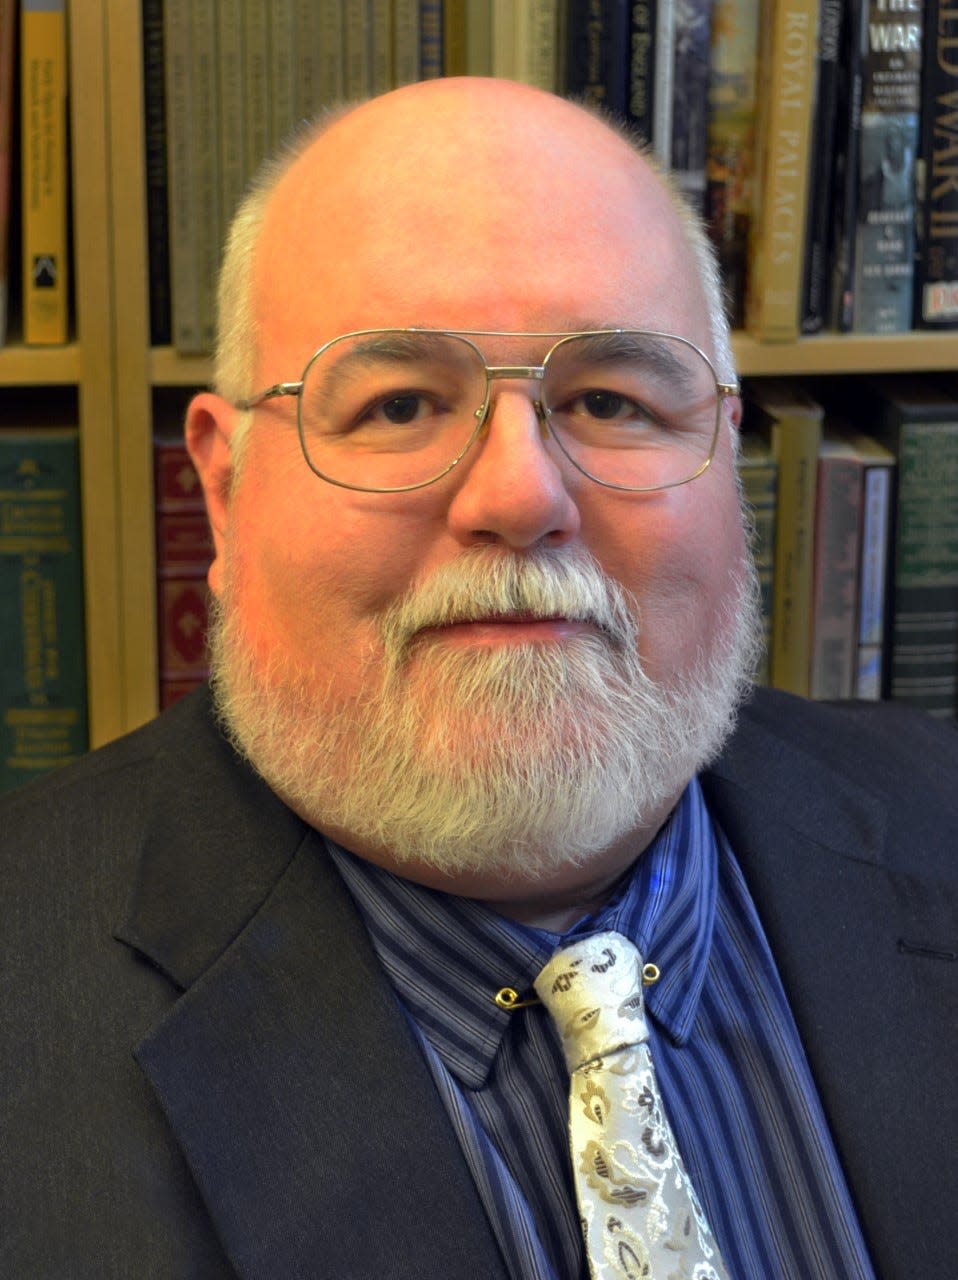 Kevin James Comerford has been named dean of New Mexico State University's Library.